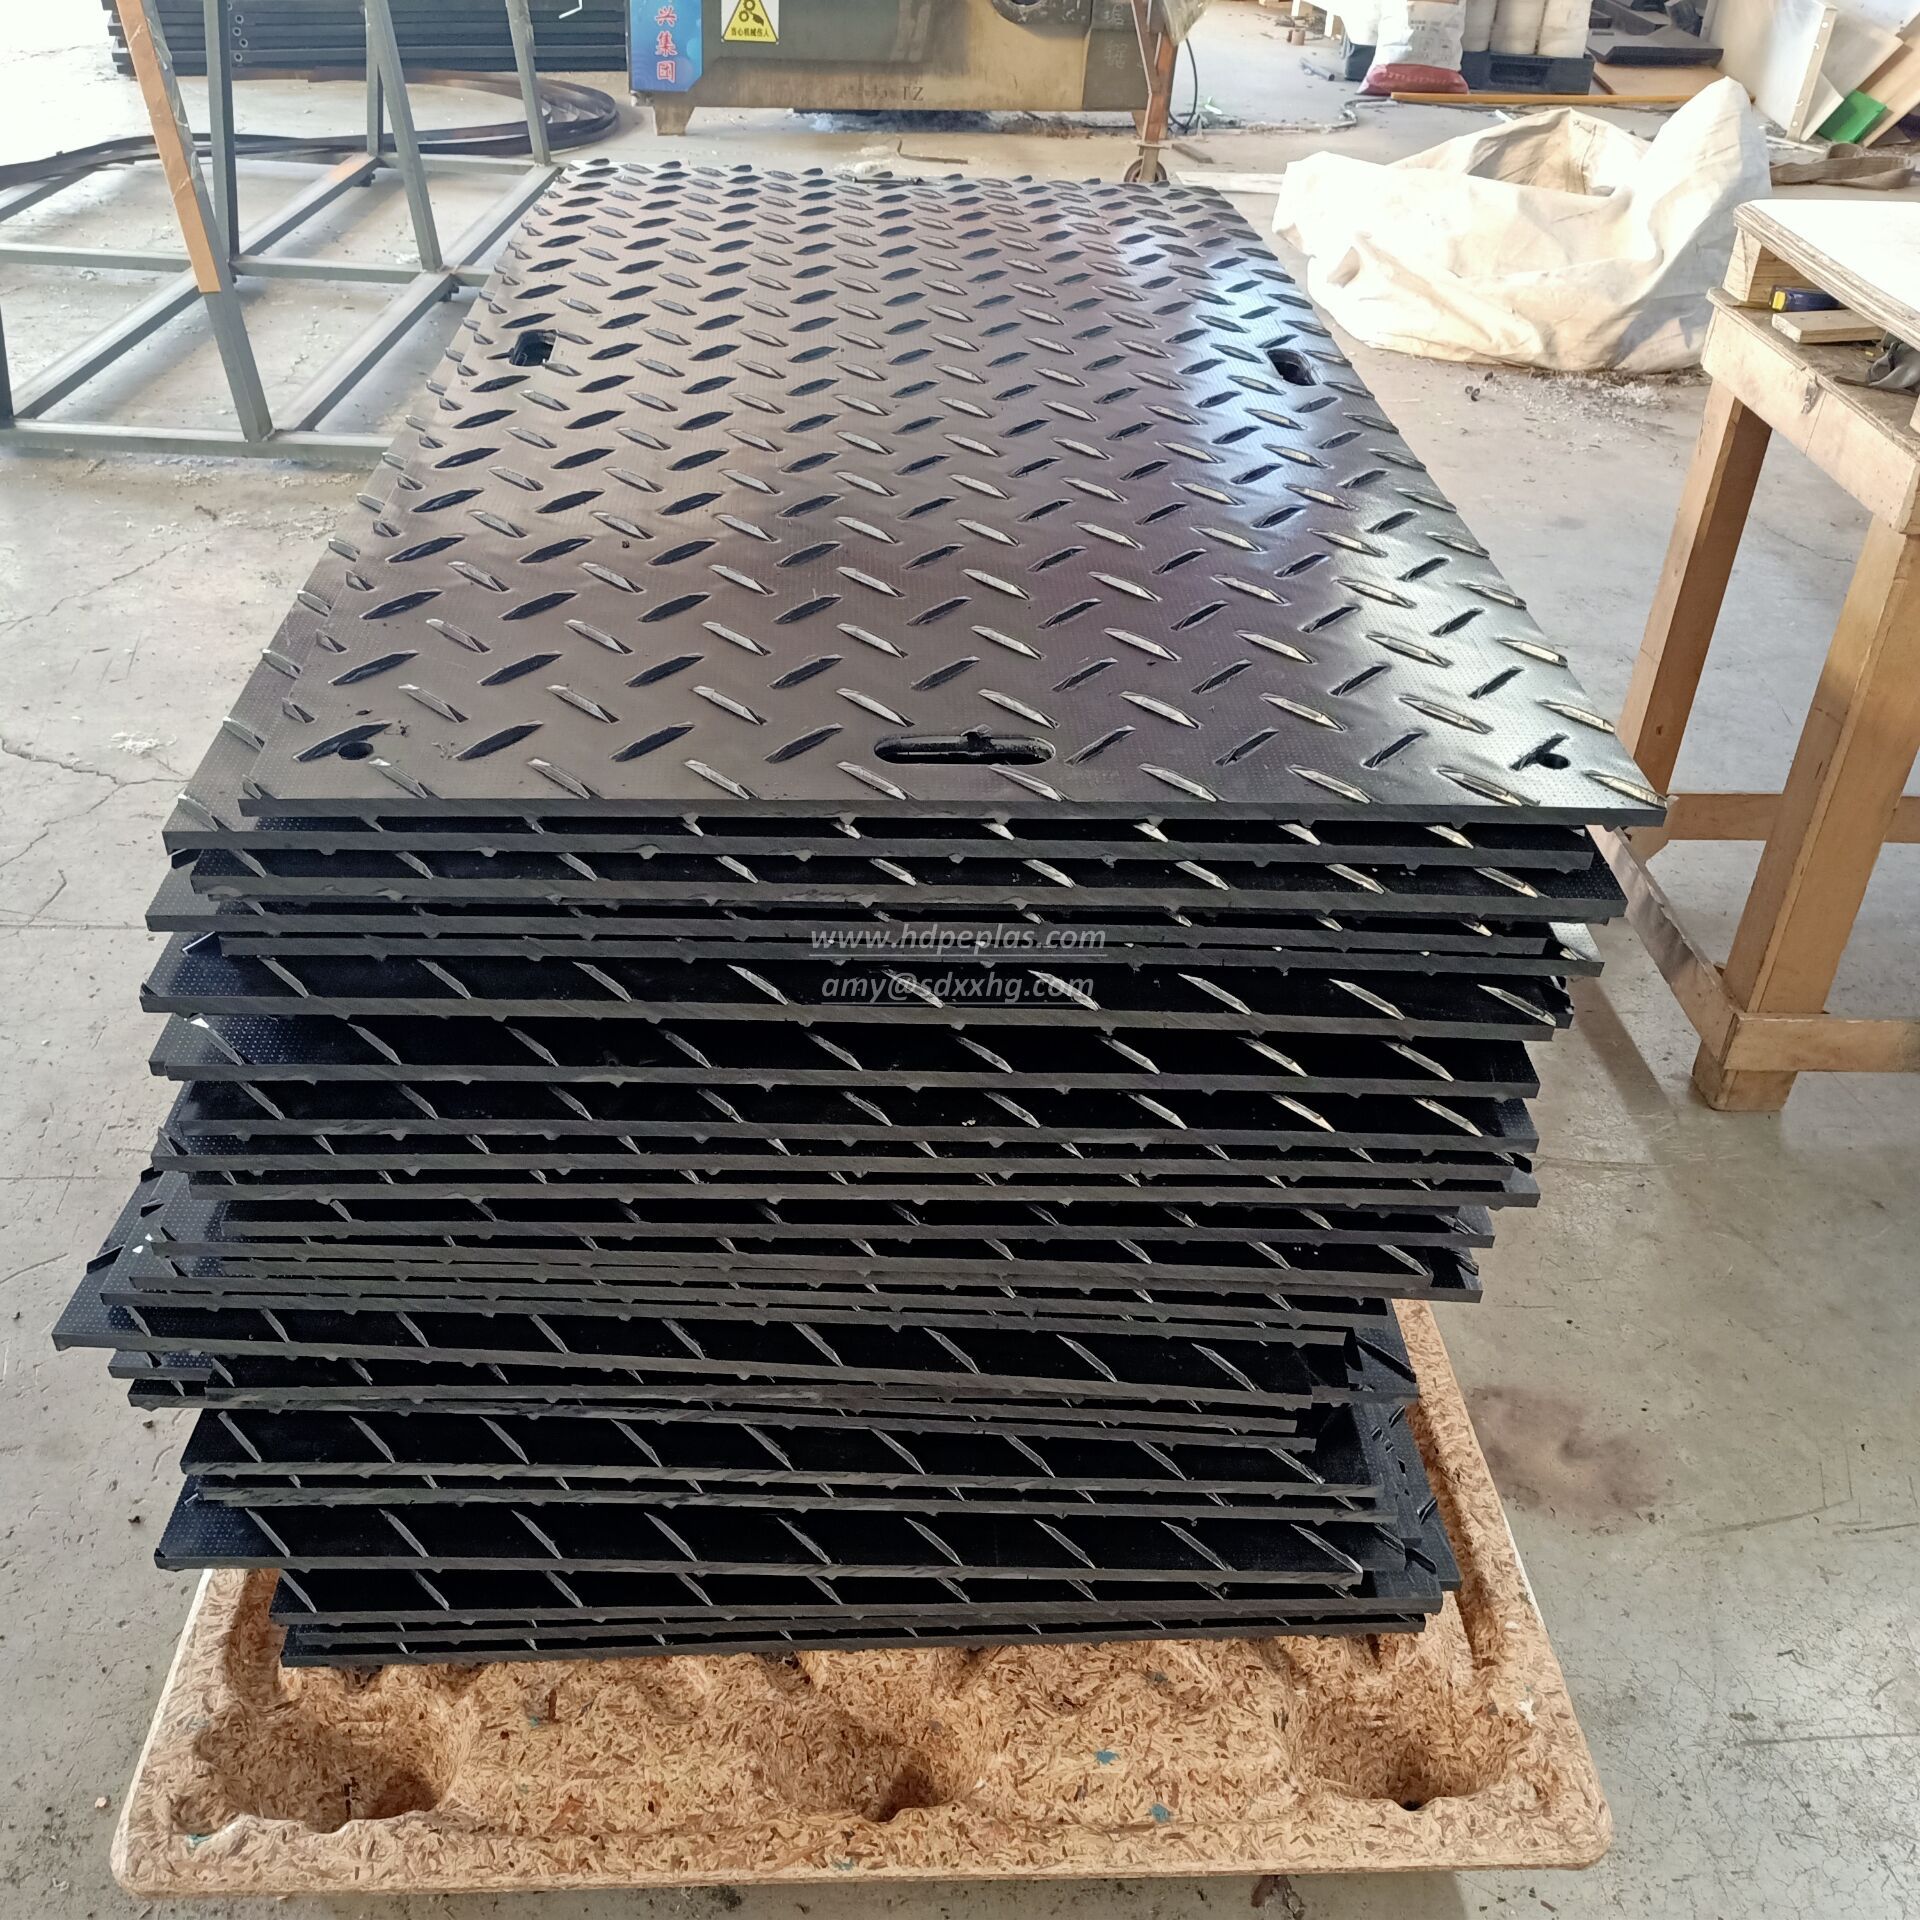 HDPE Mats for Ground Protection, Pathways, Parking and Walkways